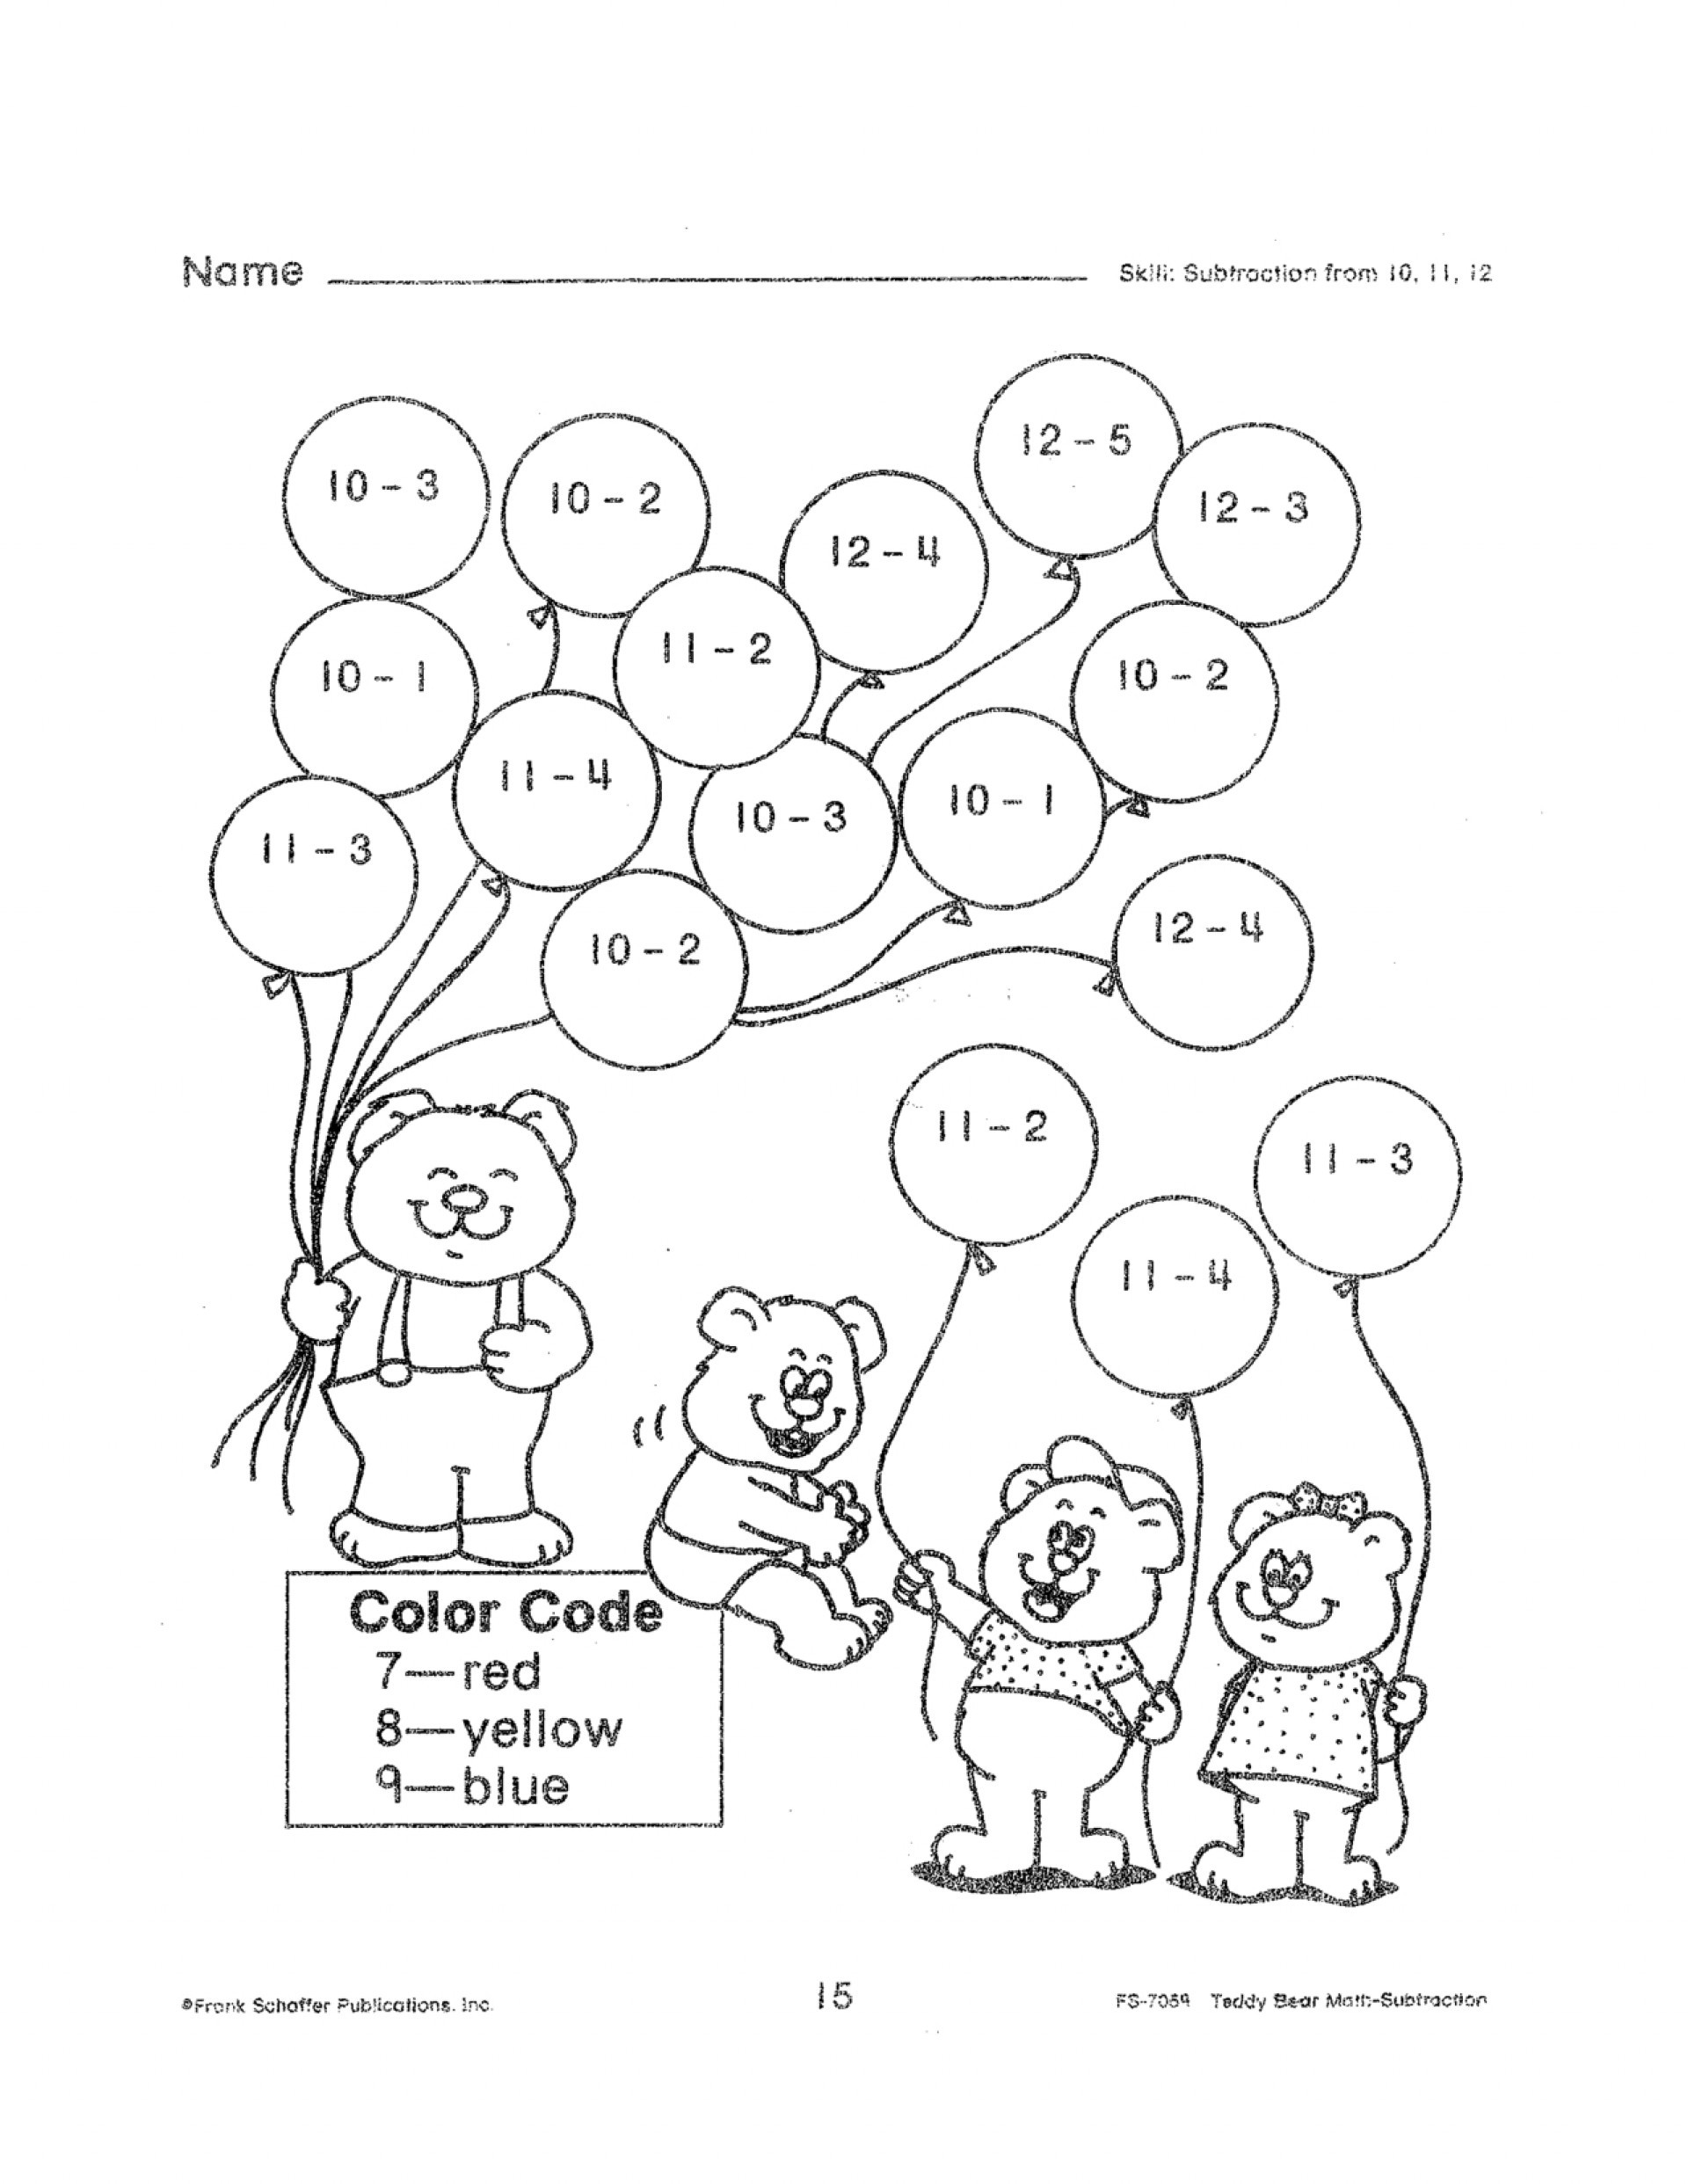 Free Math Worksheets First Grade 1 Addition Add 2 Digit 1 Digit Numbers Missing Addend No Regrouping